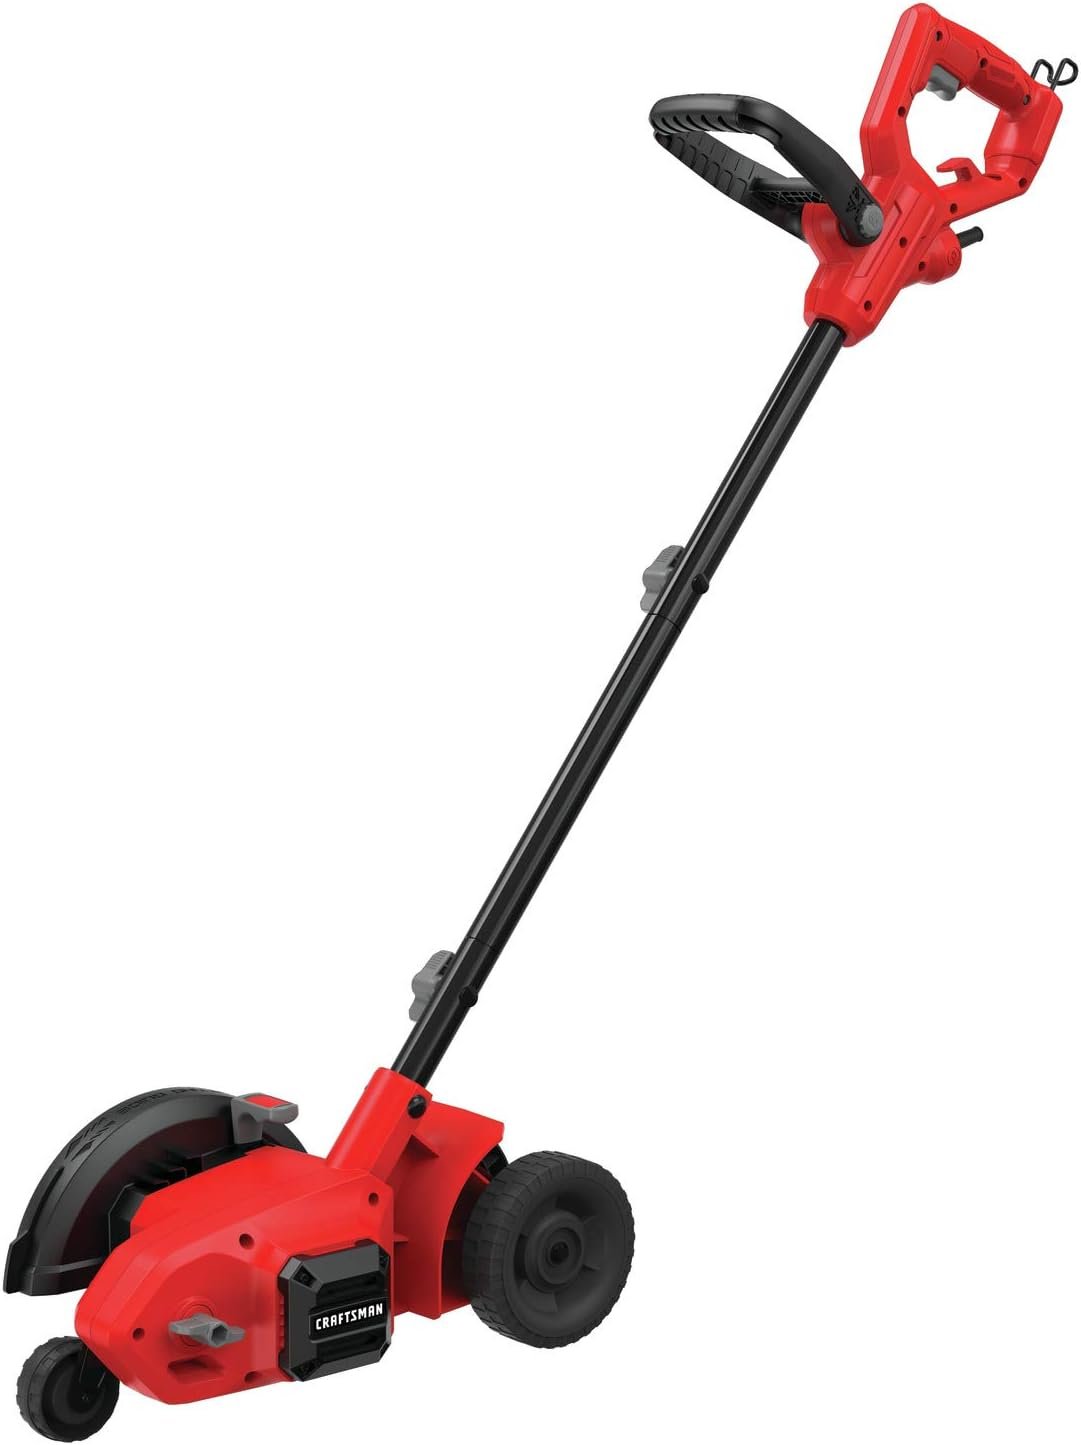 CRAFTSMAN Lawn Edger Tool review